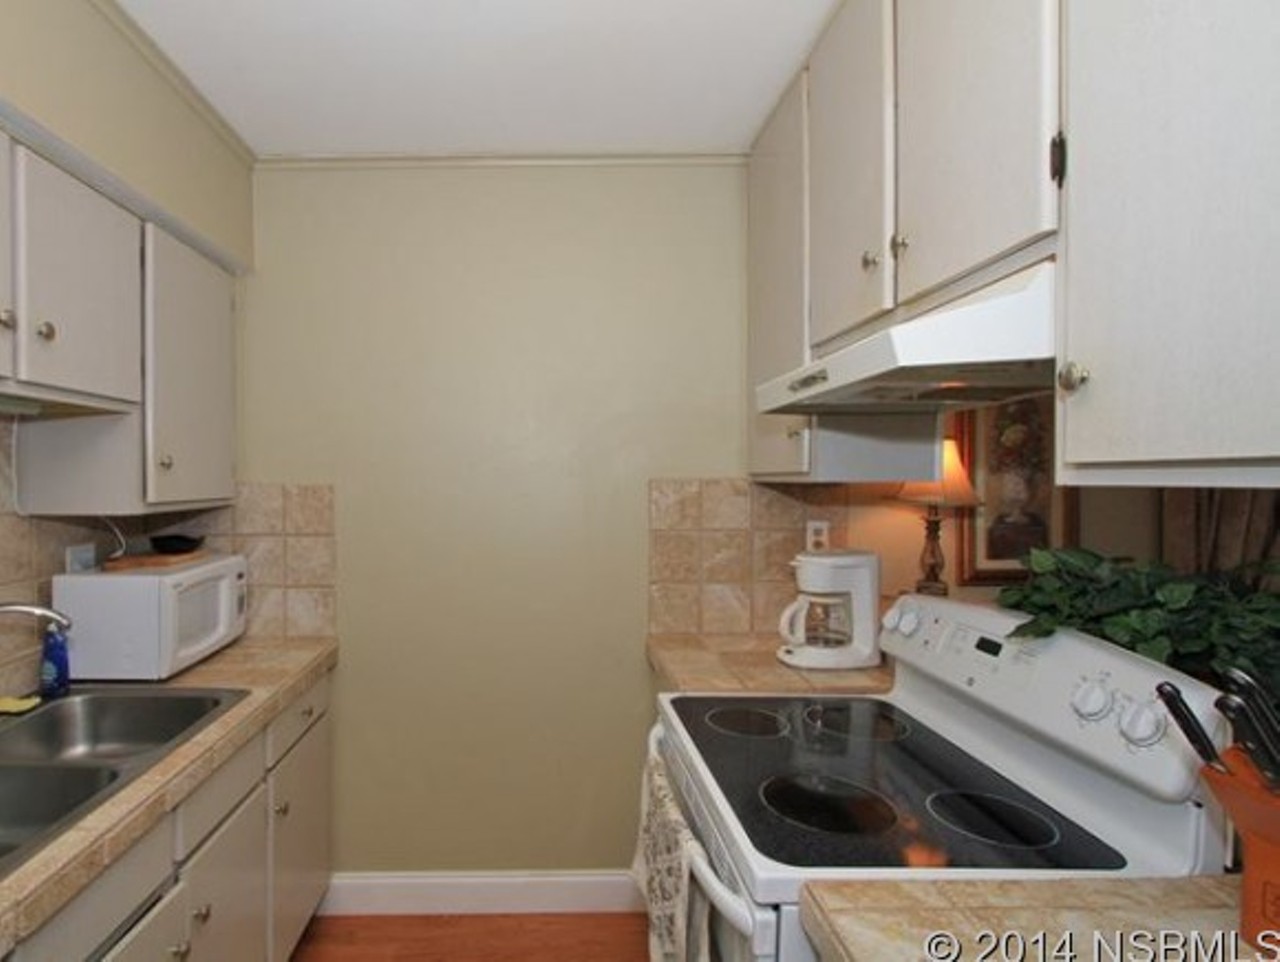 Small kitchen, but it'd work for a vacation condo, right?